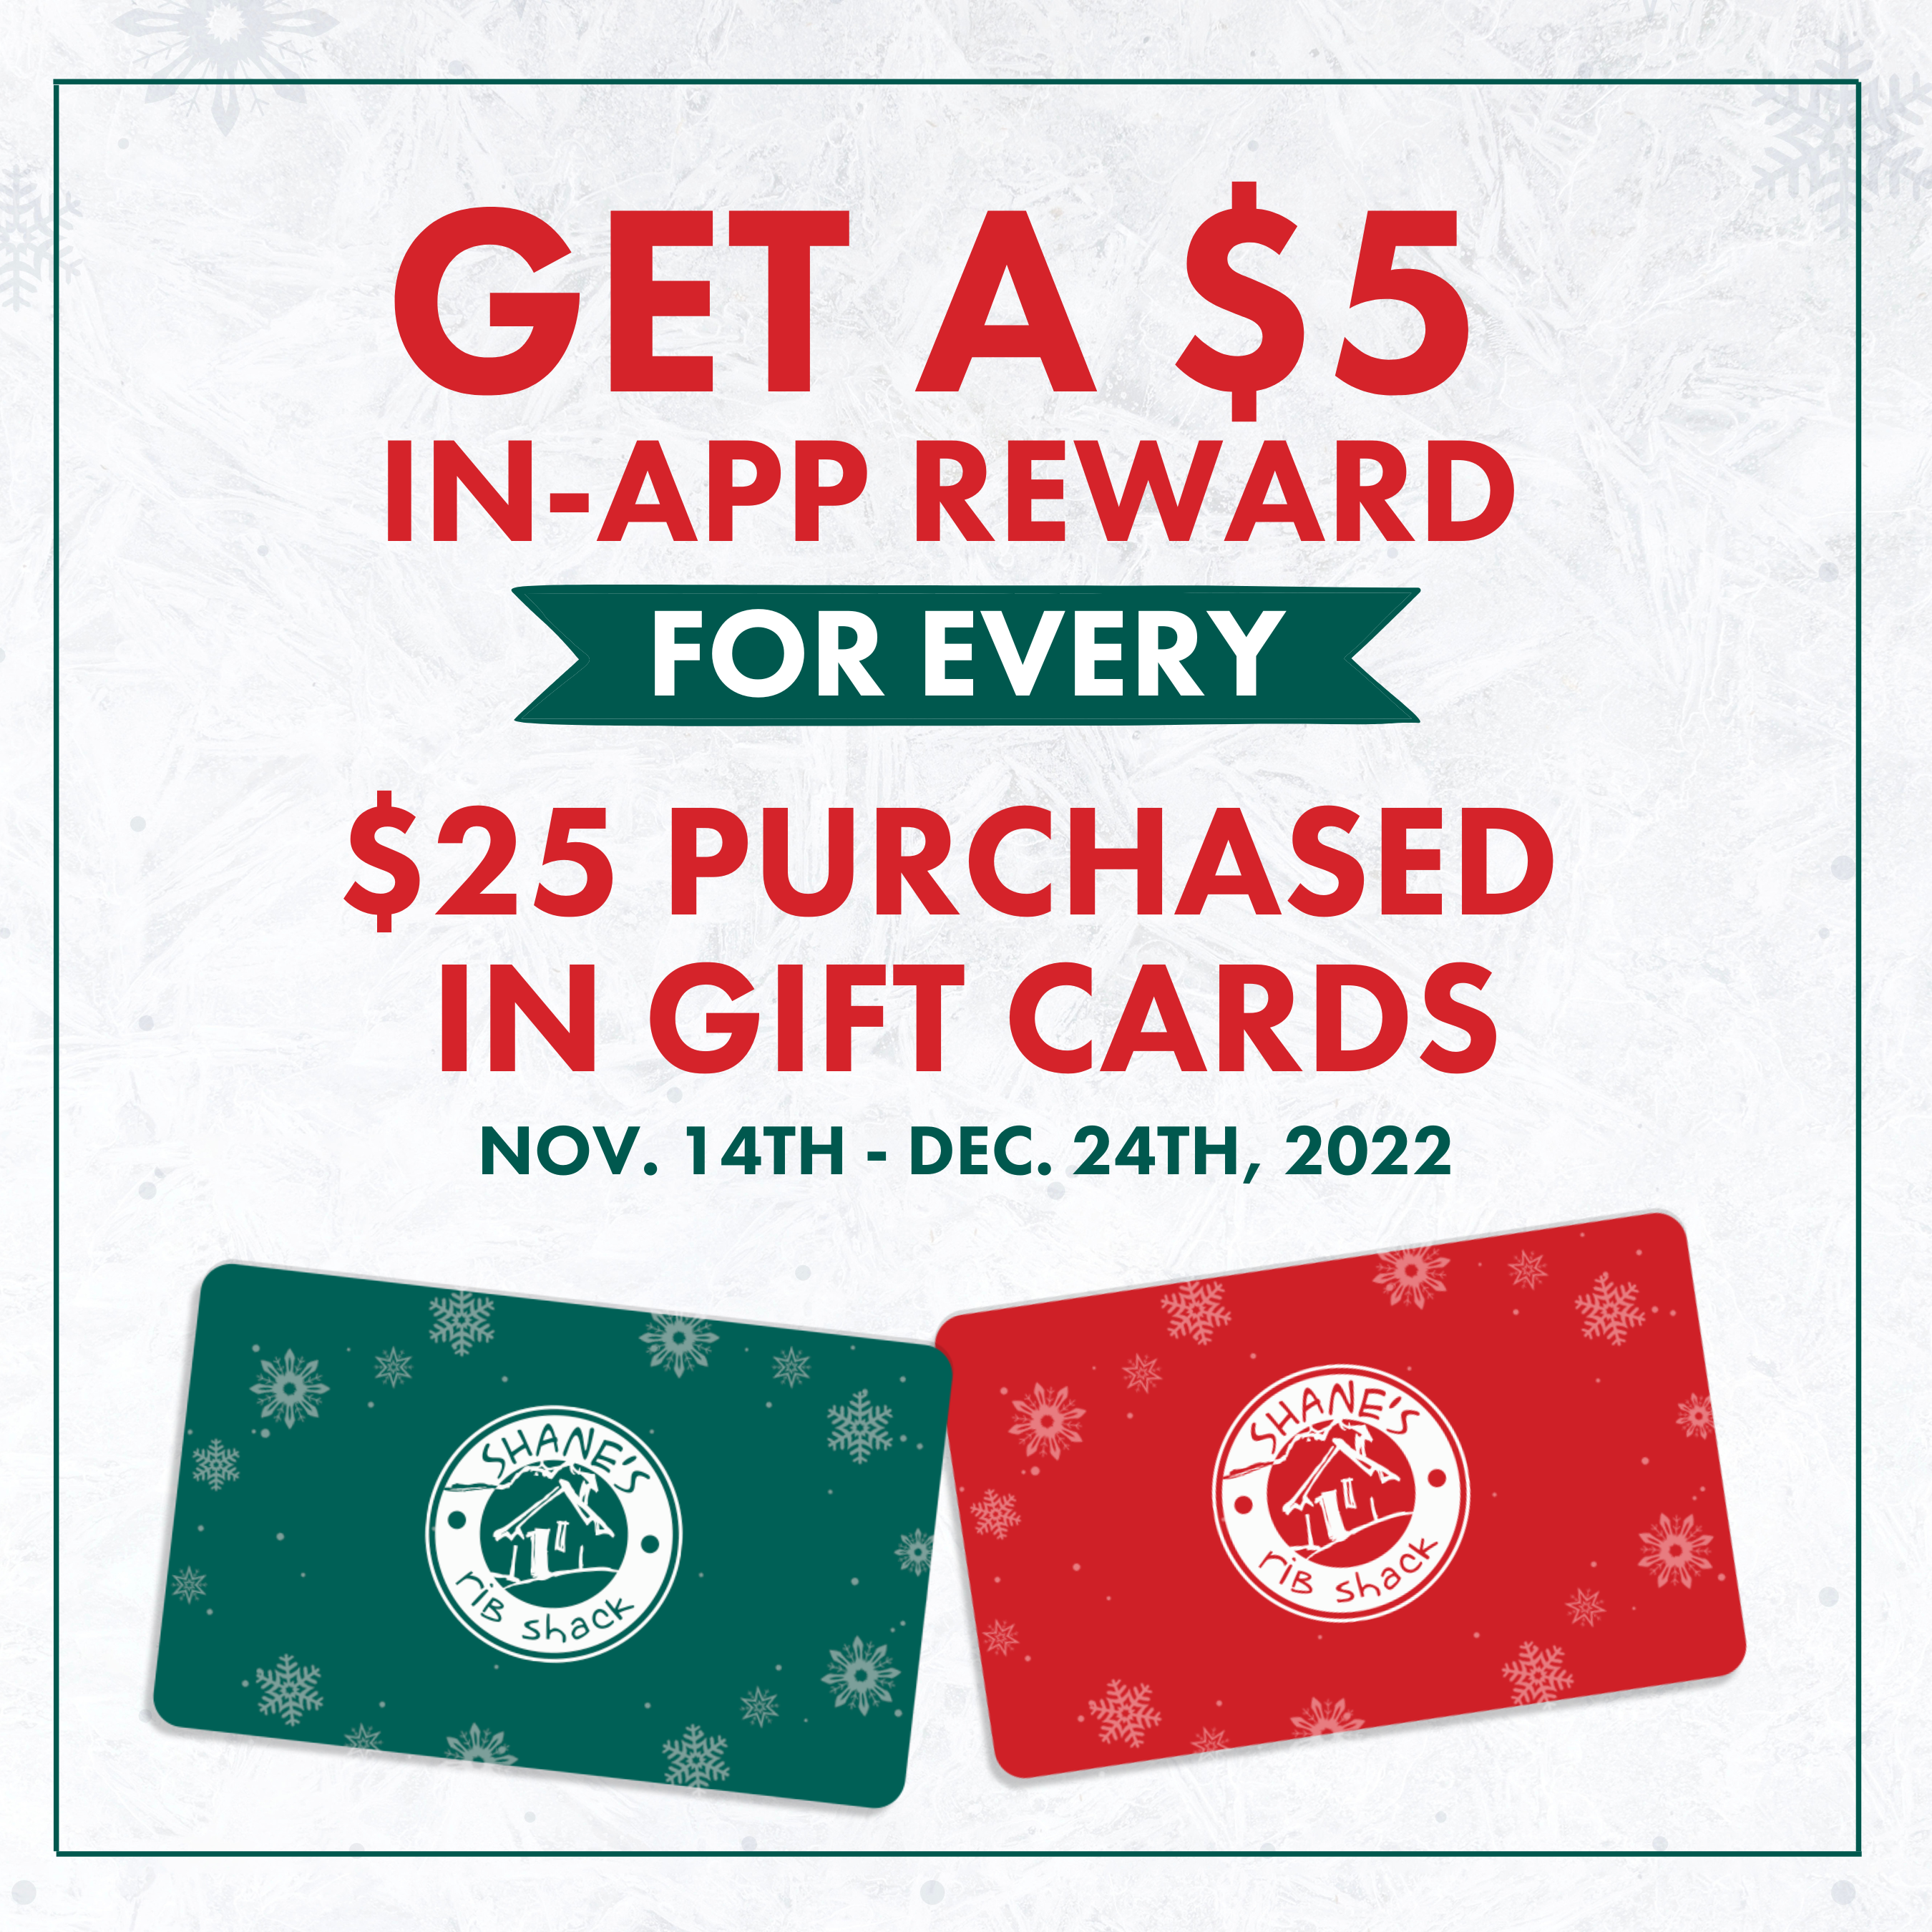 Give $25, get $5!